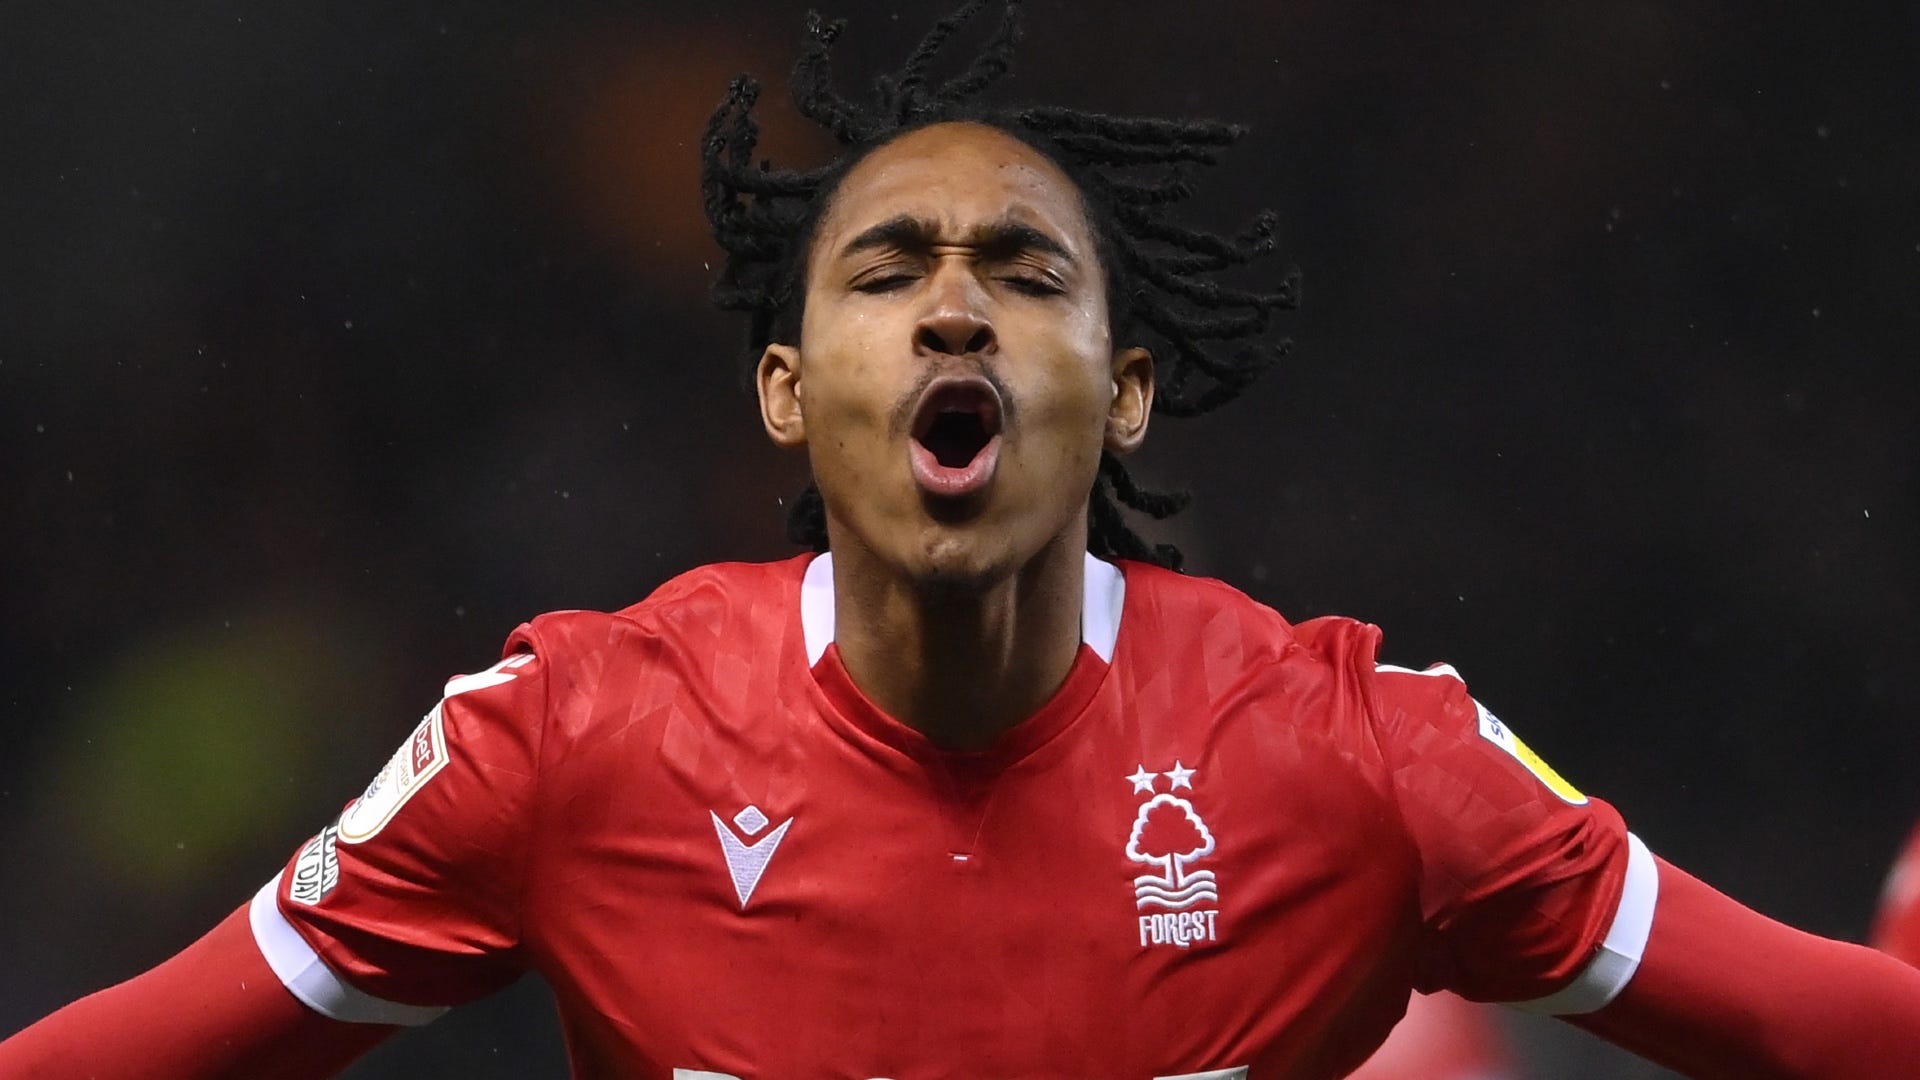 Nottingham Forest star Djed Spence named in FIFA 22 Team of the Year